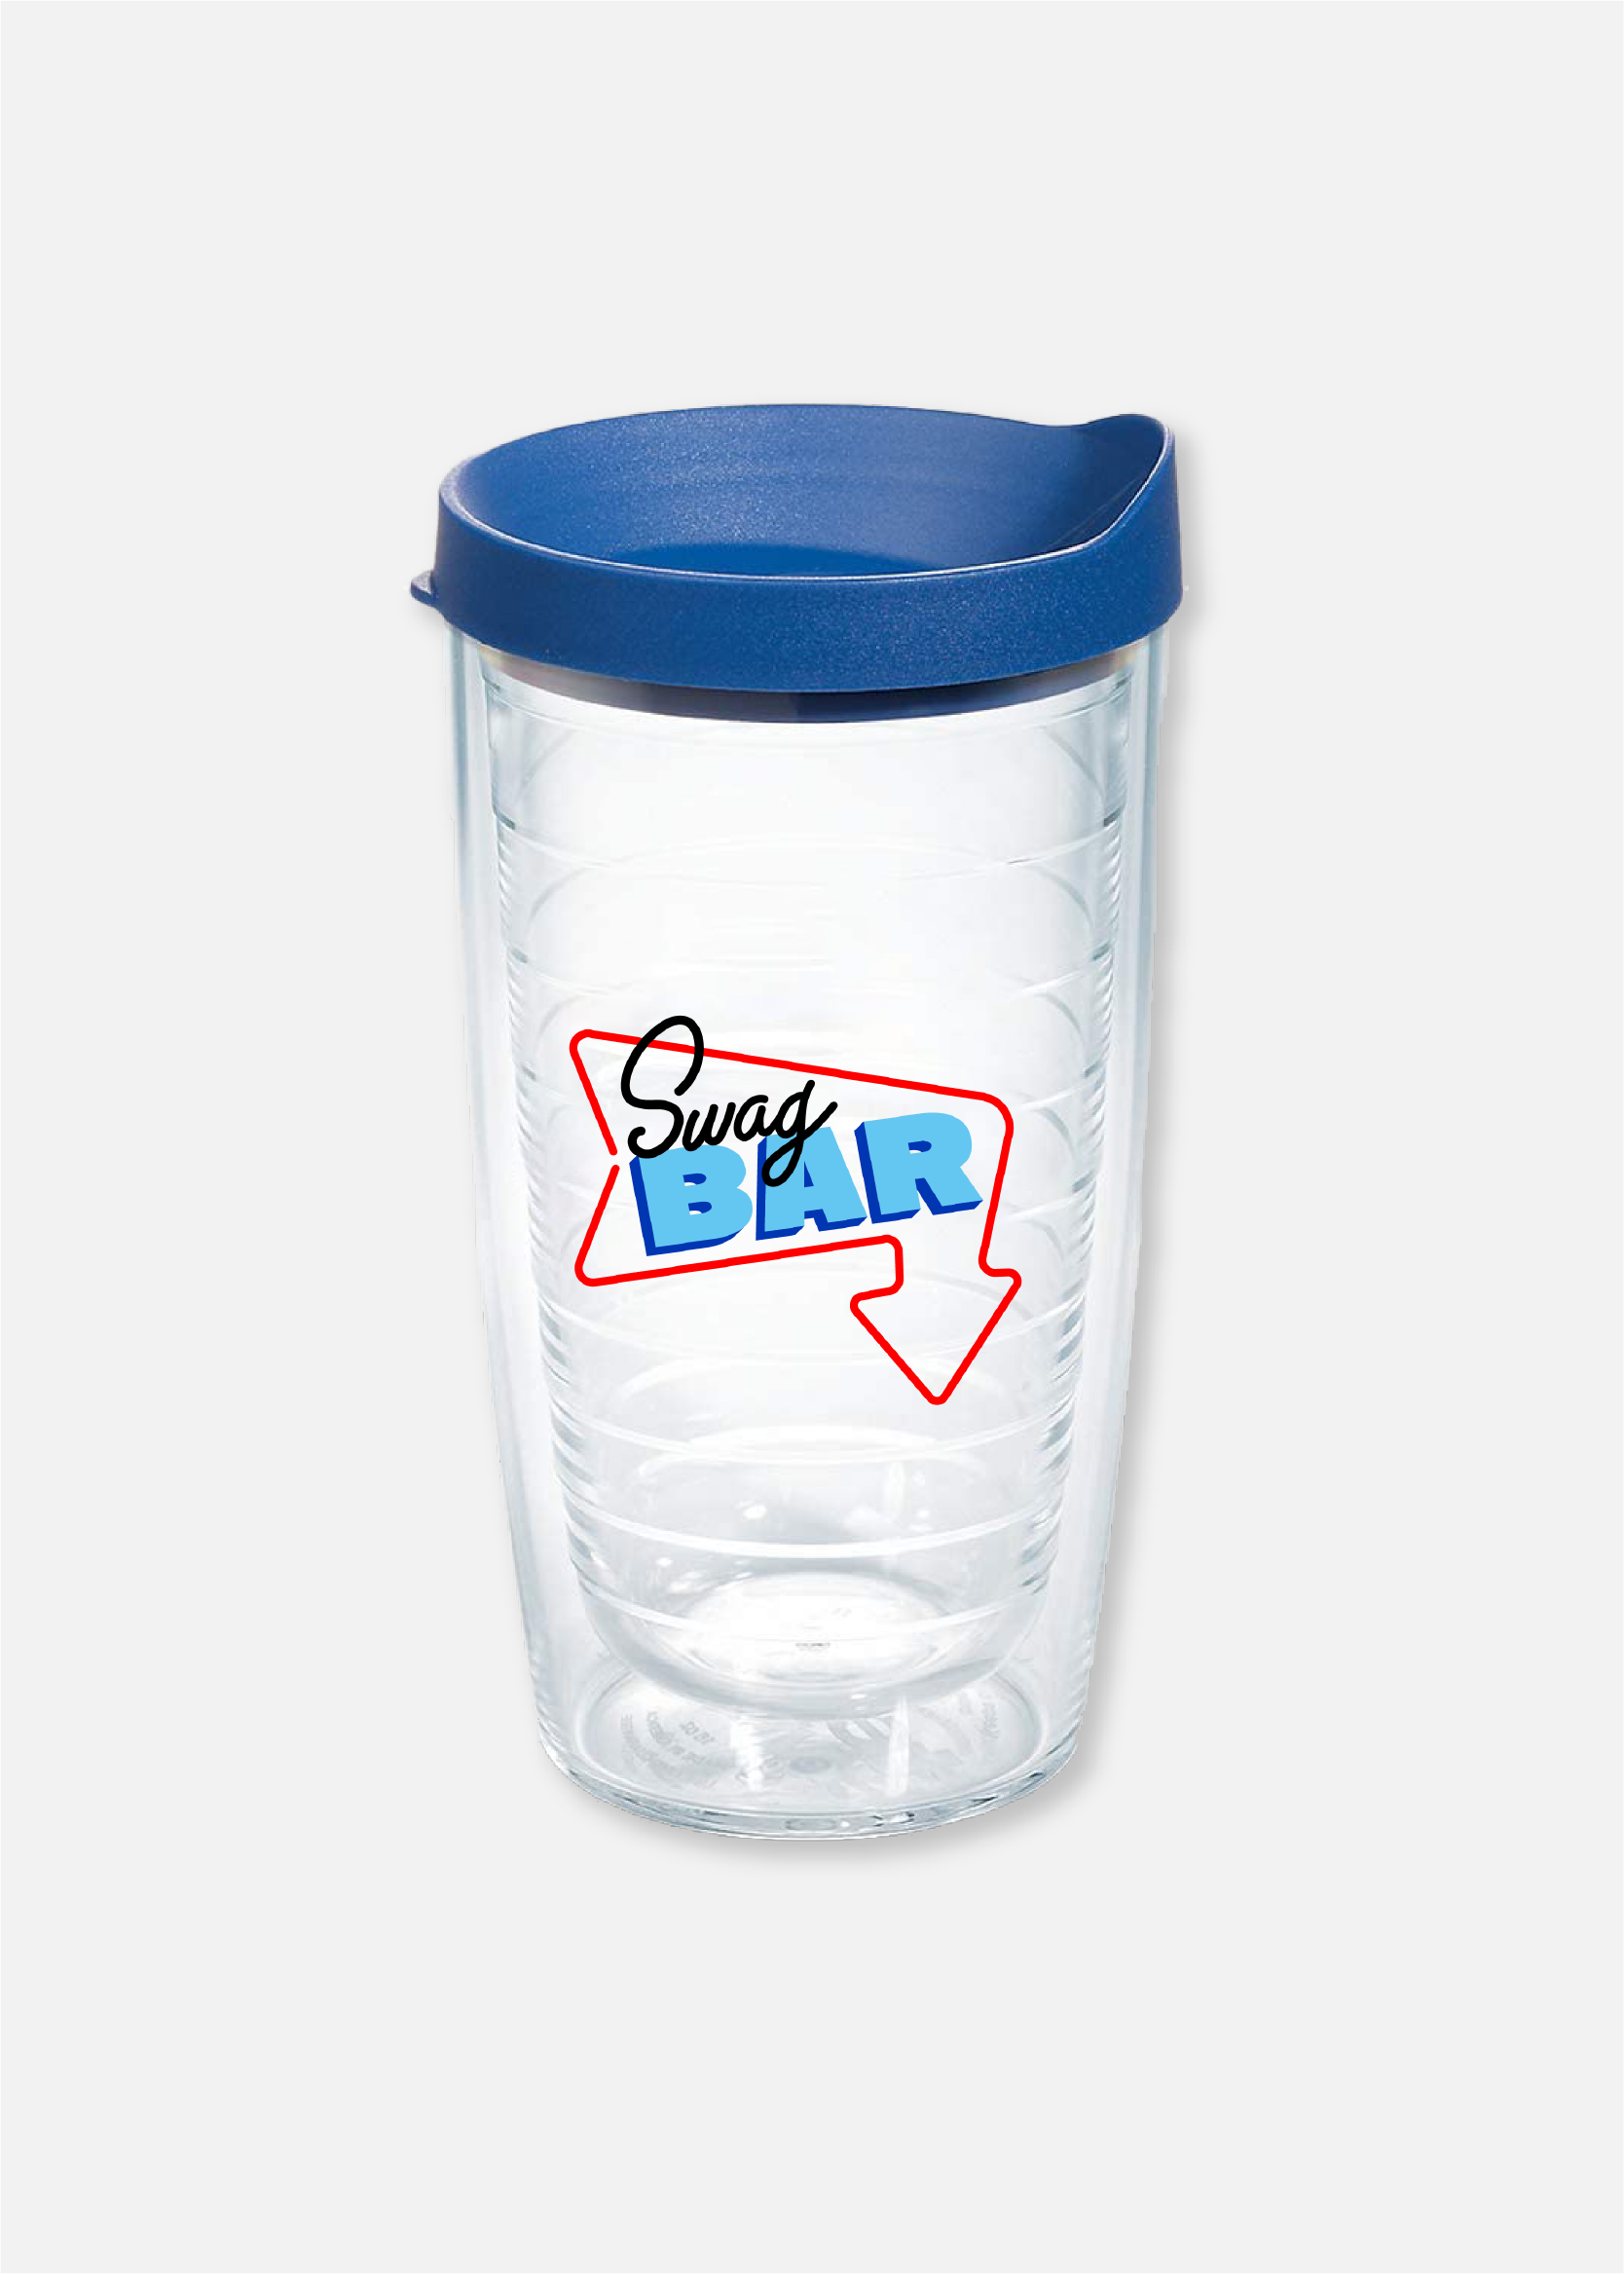 Tervis Clear Tumbler Cups